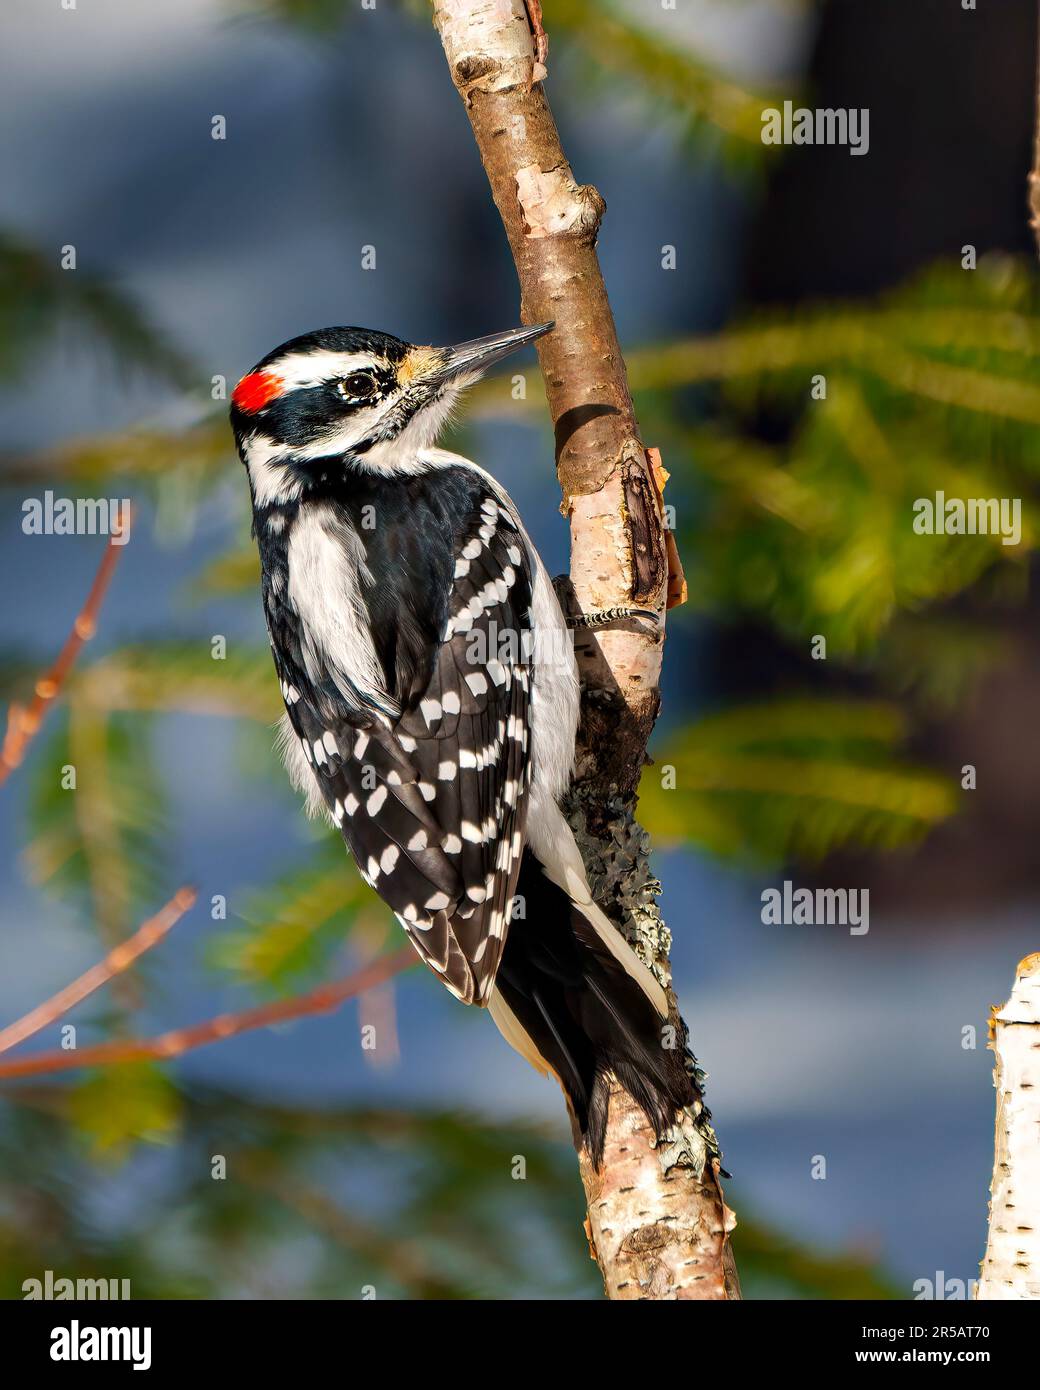 Woodpecker close-up profile rear view male clinging to a birch tree branch with a blur forest background in its environment and habitat surrounding. Stock Photo